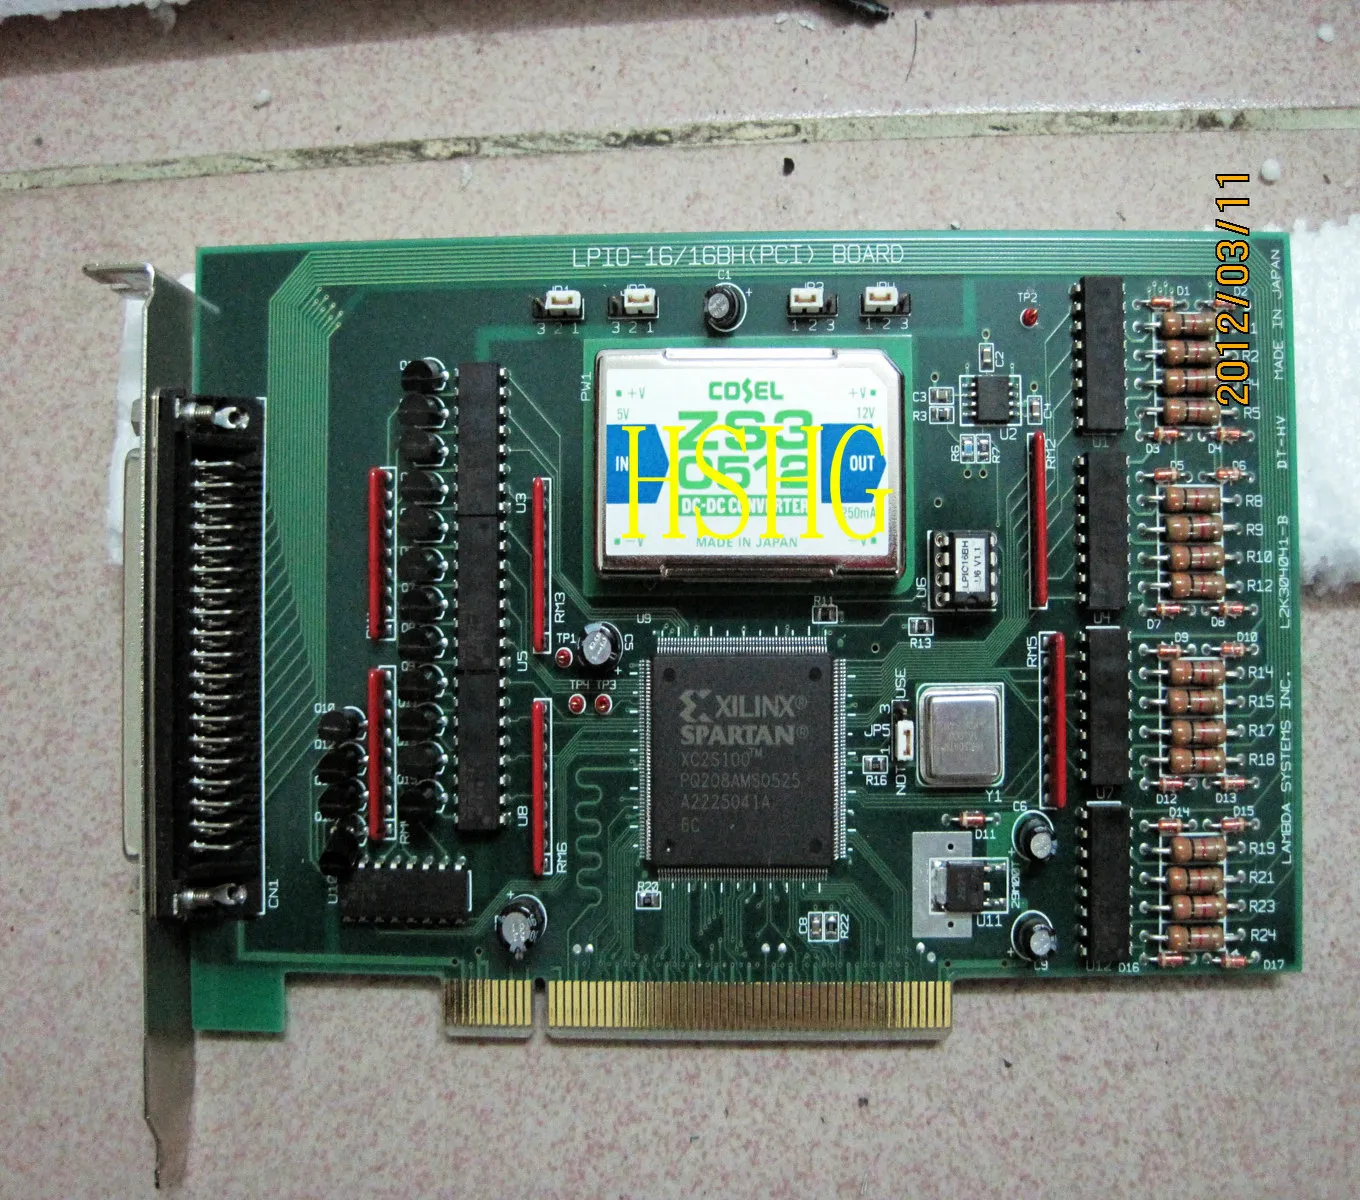 100% Tested Work Perfect for LPIO-16/16BH PCI BOARD Cards